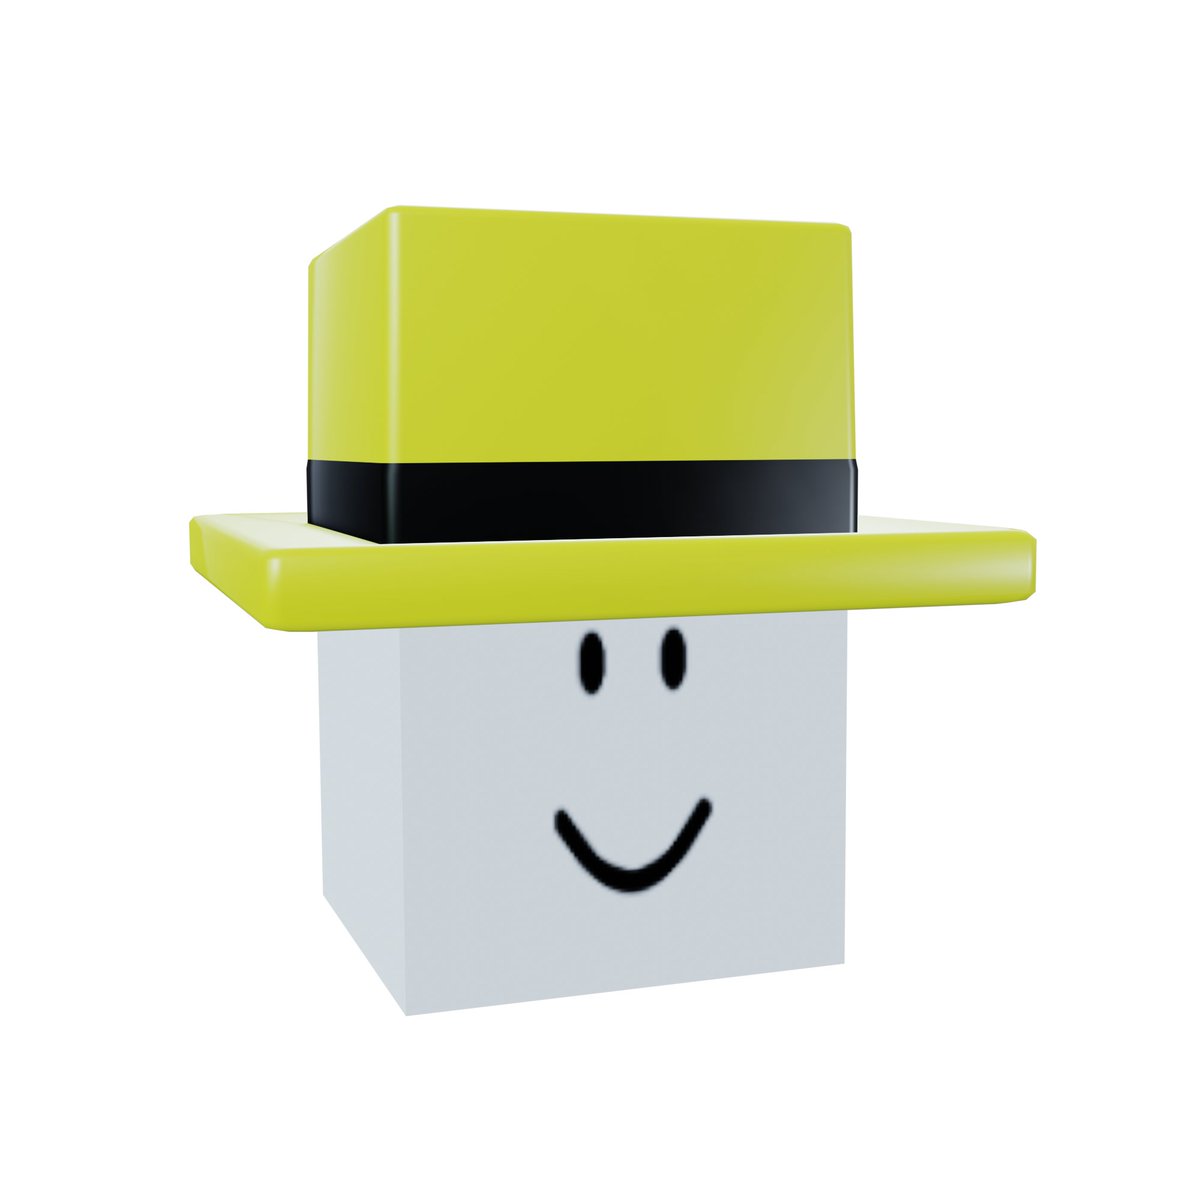 Mas On Twitter Ugc Concept 41 Blockhat Price 250r Timer 30 Minutes Be Quick Type Hat Accessory Description Youngsters These Days Only Wearing The Round Head Being Blocky Is The Best Https T Co Uqvp2ls8kn - roblox round head